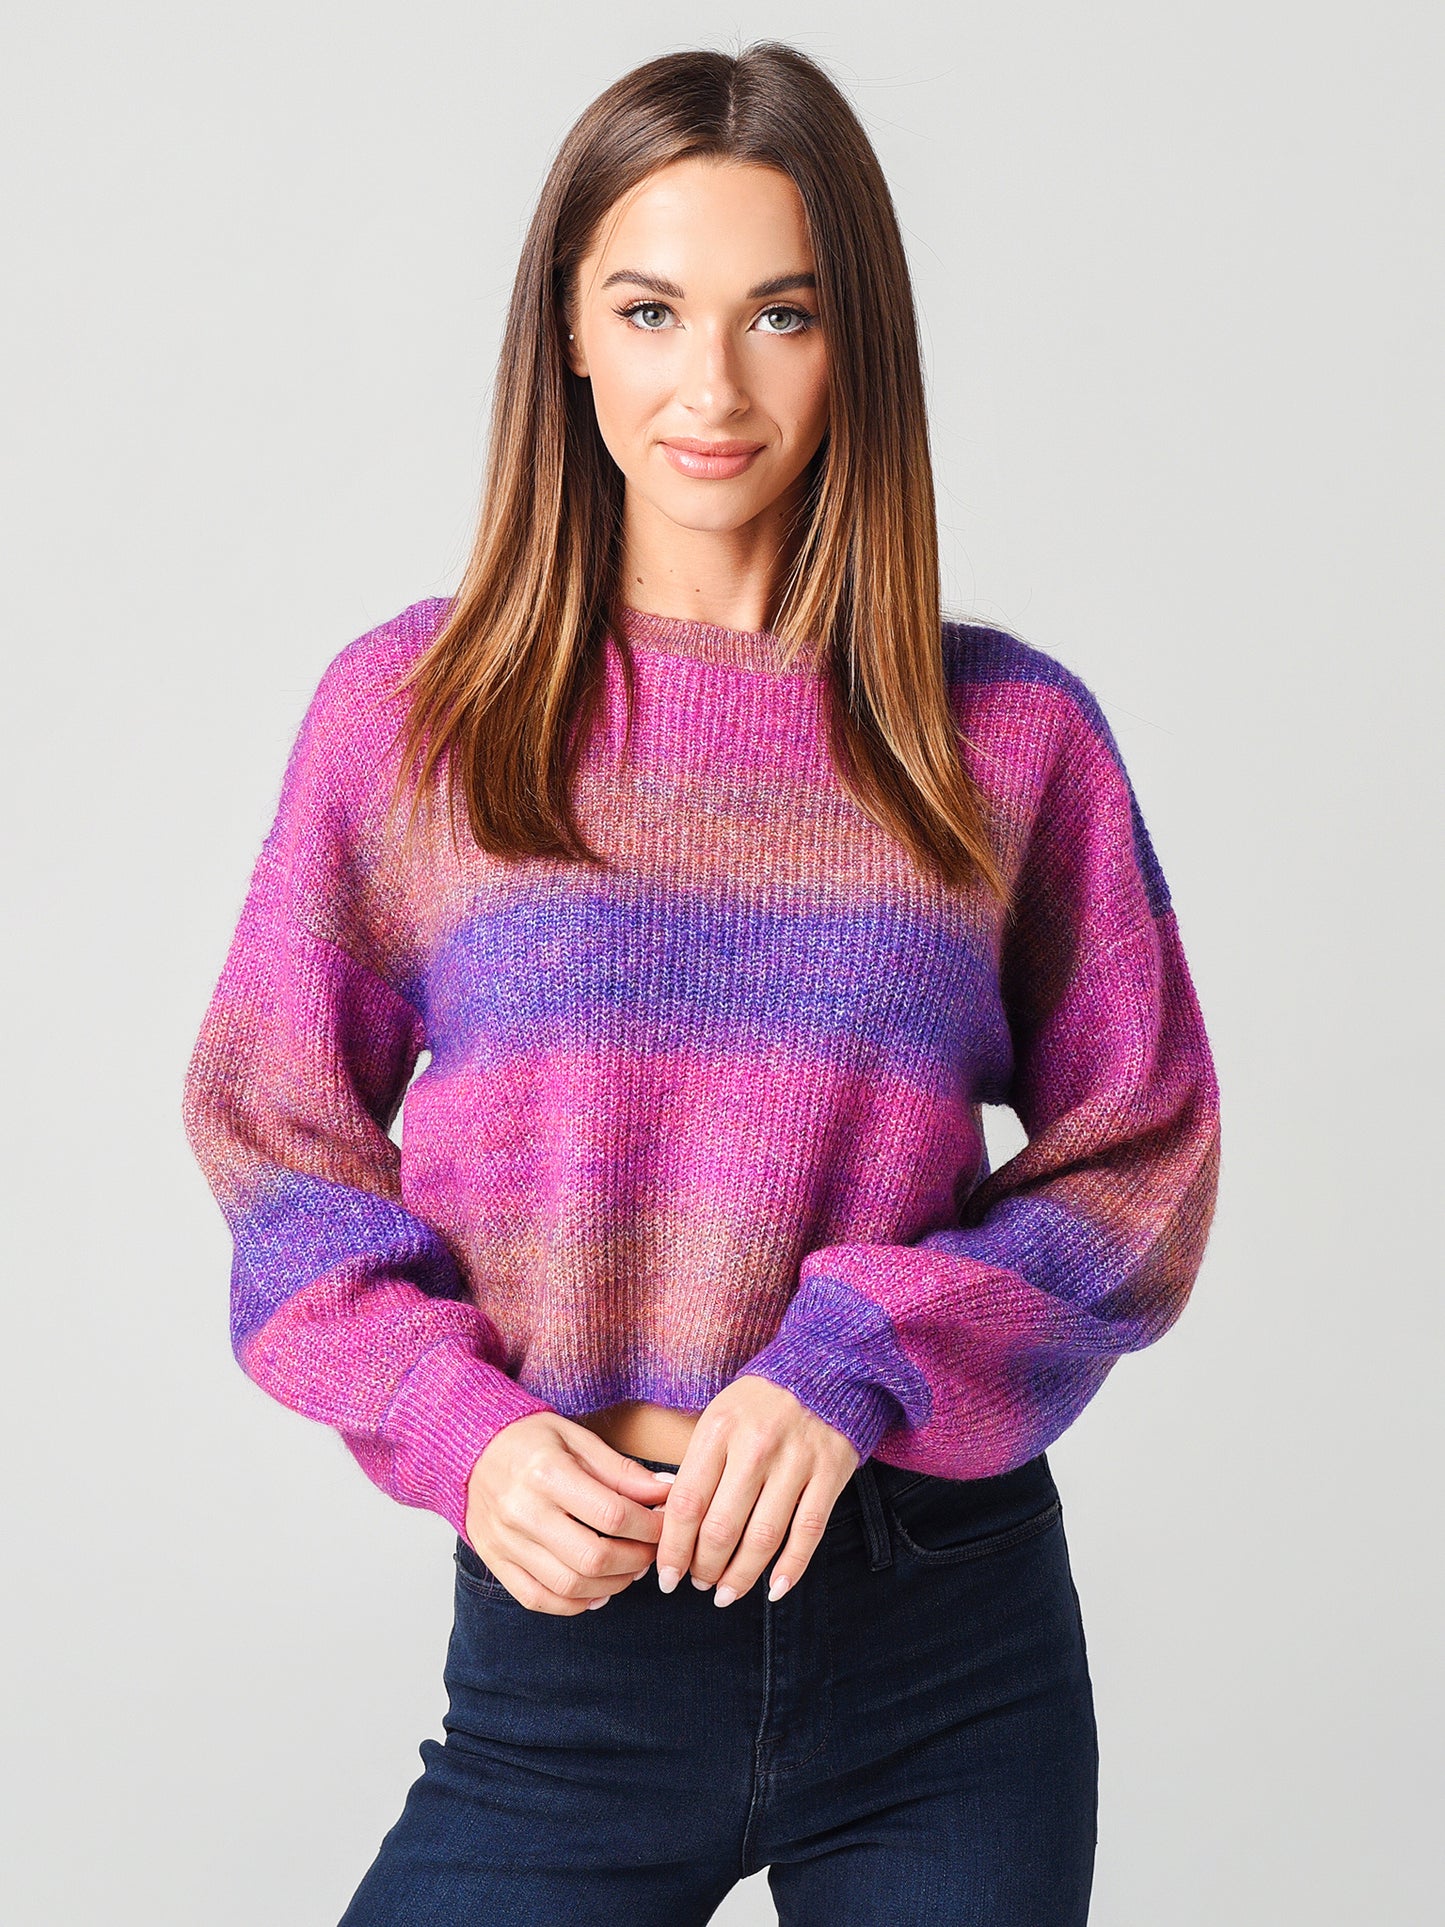 Cupcakes And Cashmere Women's Clem Sweater